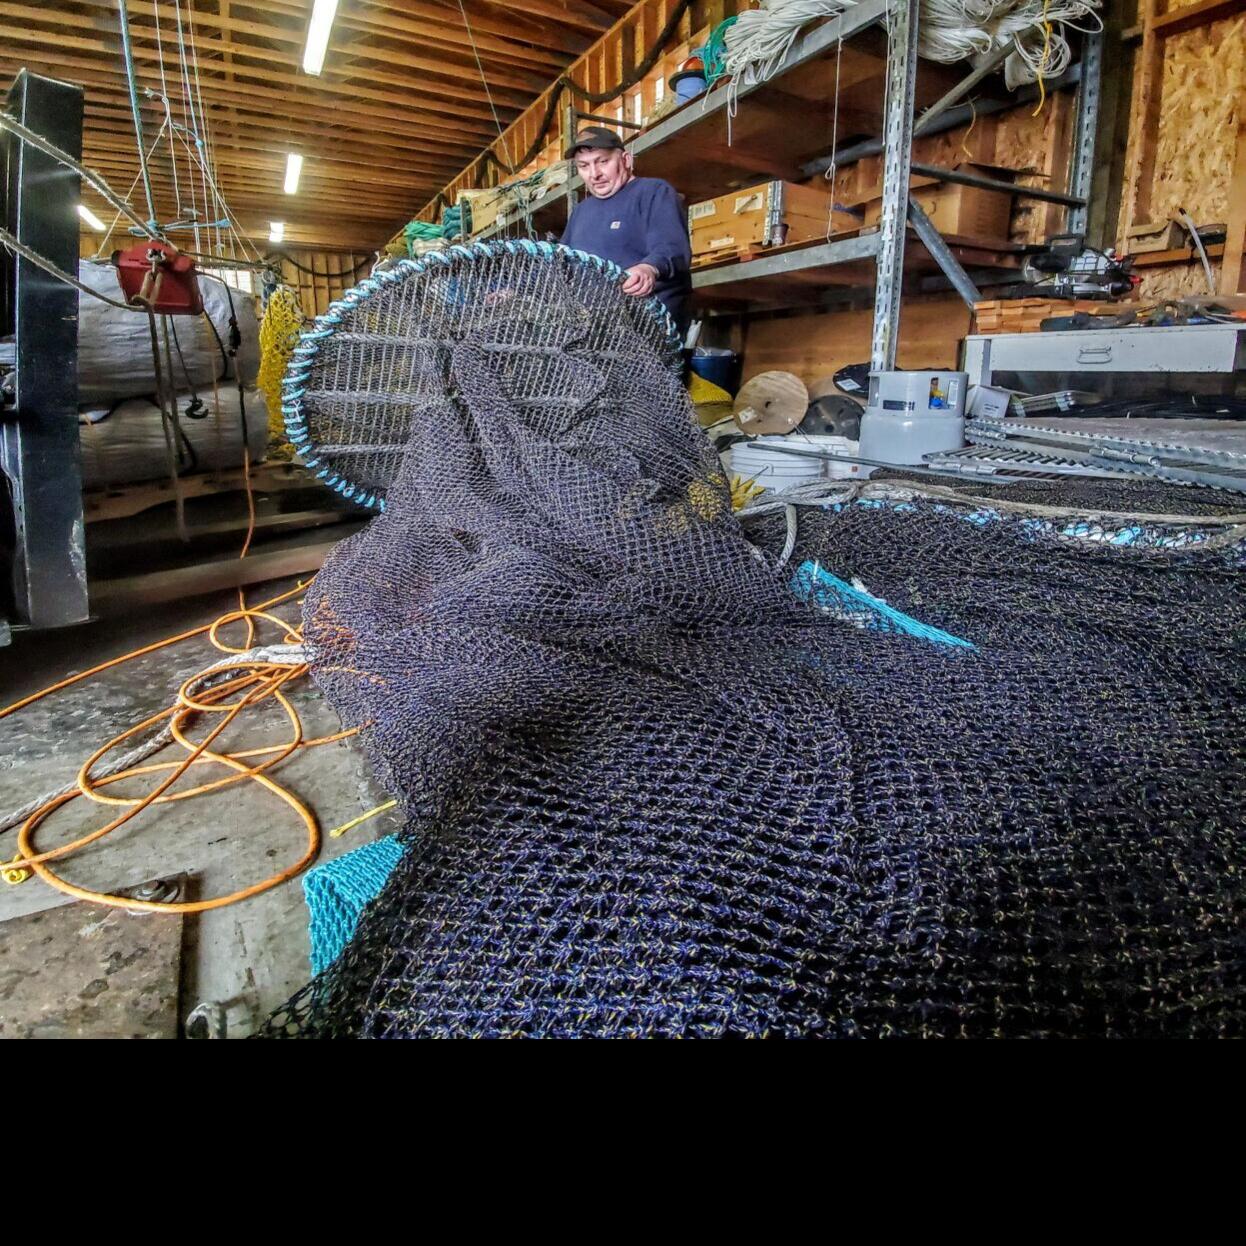 Making fishing nets is collaboration of craft and science, Cover Story